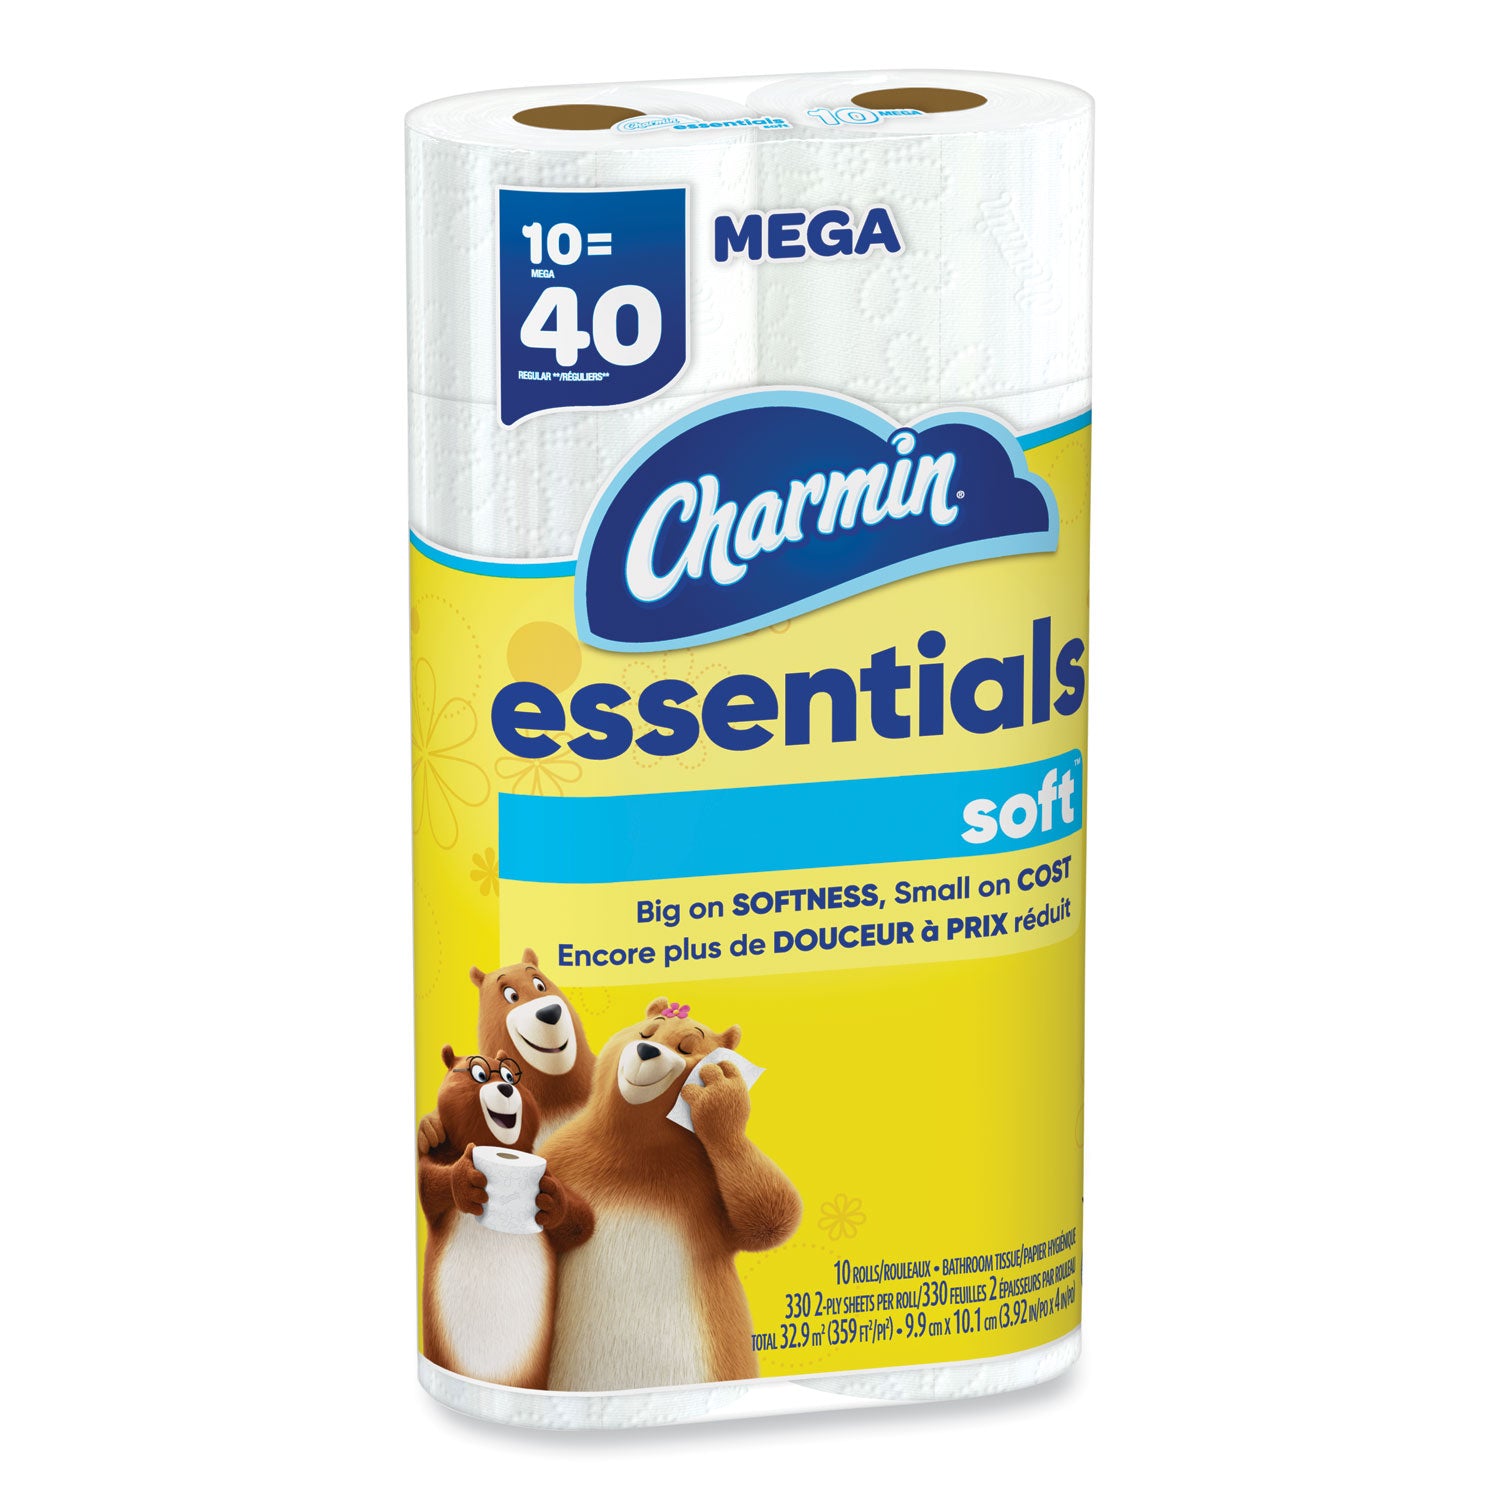 essentials-soft-bathroom-tissue-septic-safe-2-ply-white-352-sheets-roll-30-rolls-carton_pgc67355 - 7